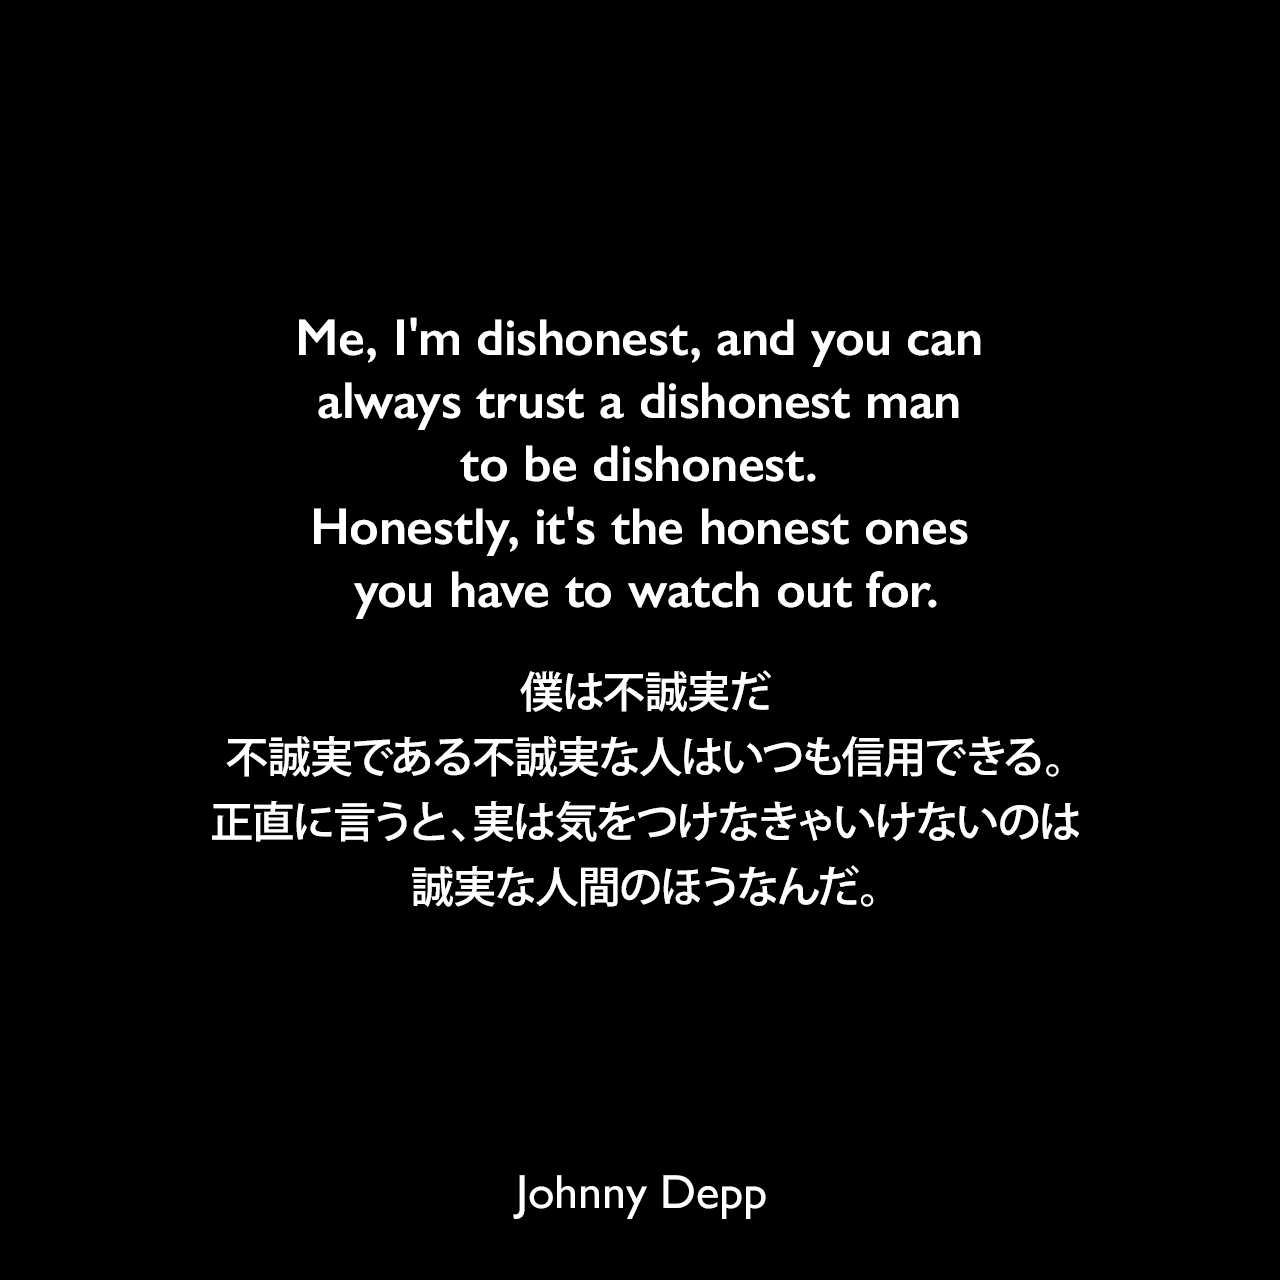 Me, I'm dishonest, and you can always trust a dishonest man to be dishonest. Honestly, it's the honest ones you have to watch out for.僕は不誠実だ、不誠実である不誠実な人はいつも信用できる。正直に言うと、実は気をつけなきゃいけないのは誠実な人間のほうなんだ。Johnny Depp